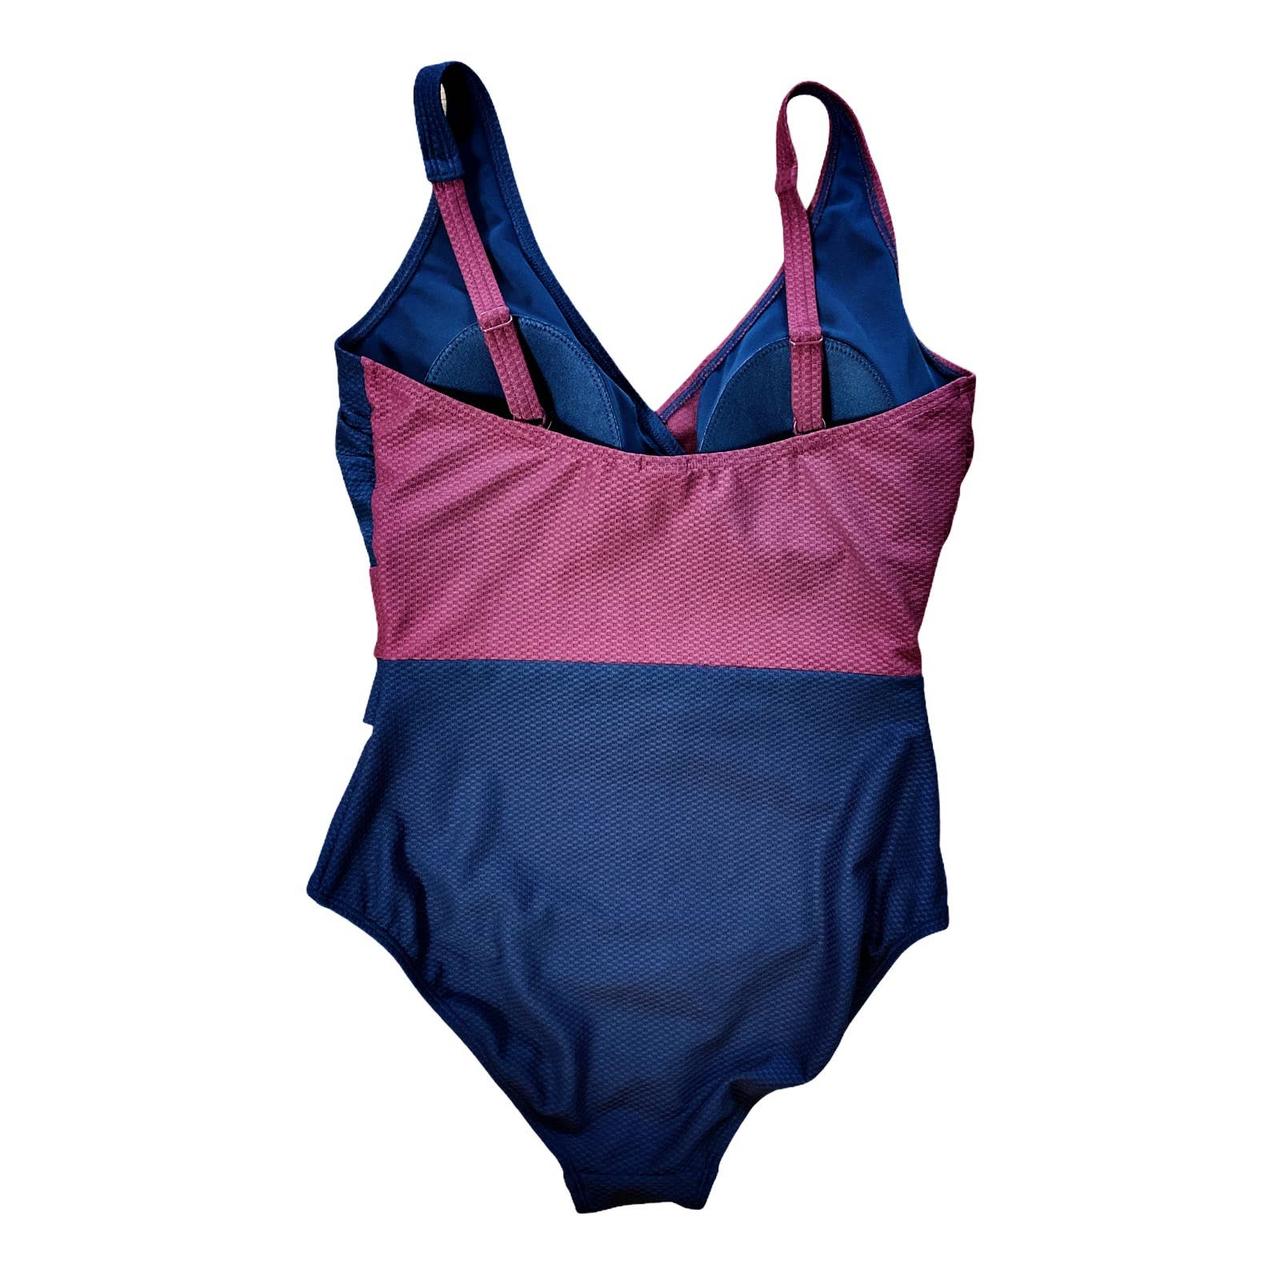 Women's Blue and Red Bikinis-and-tankini-sets | Depop